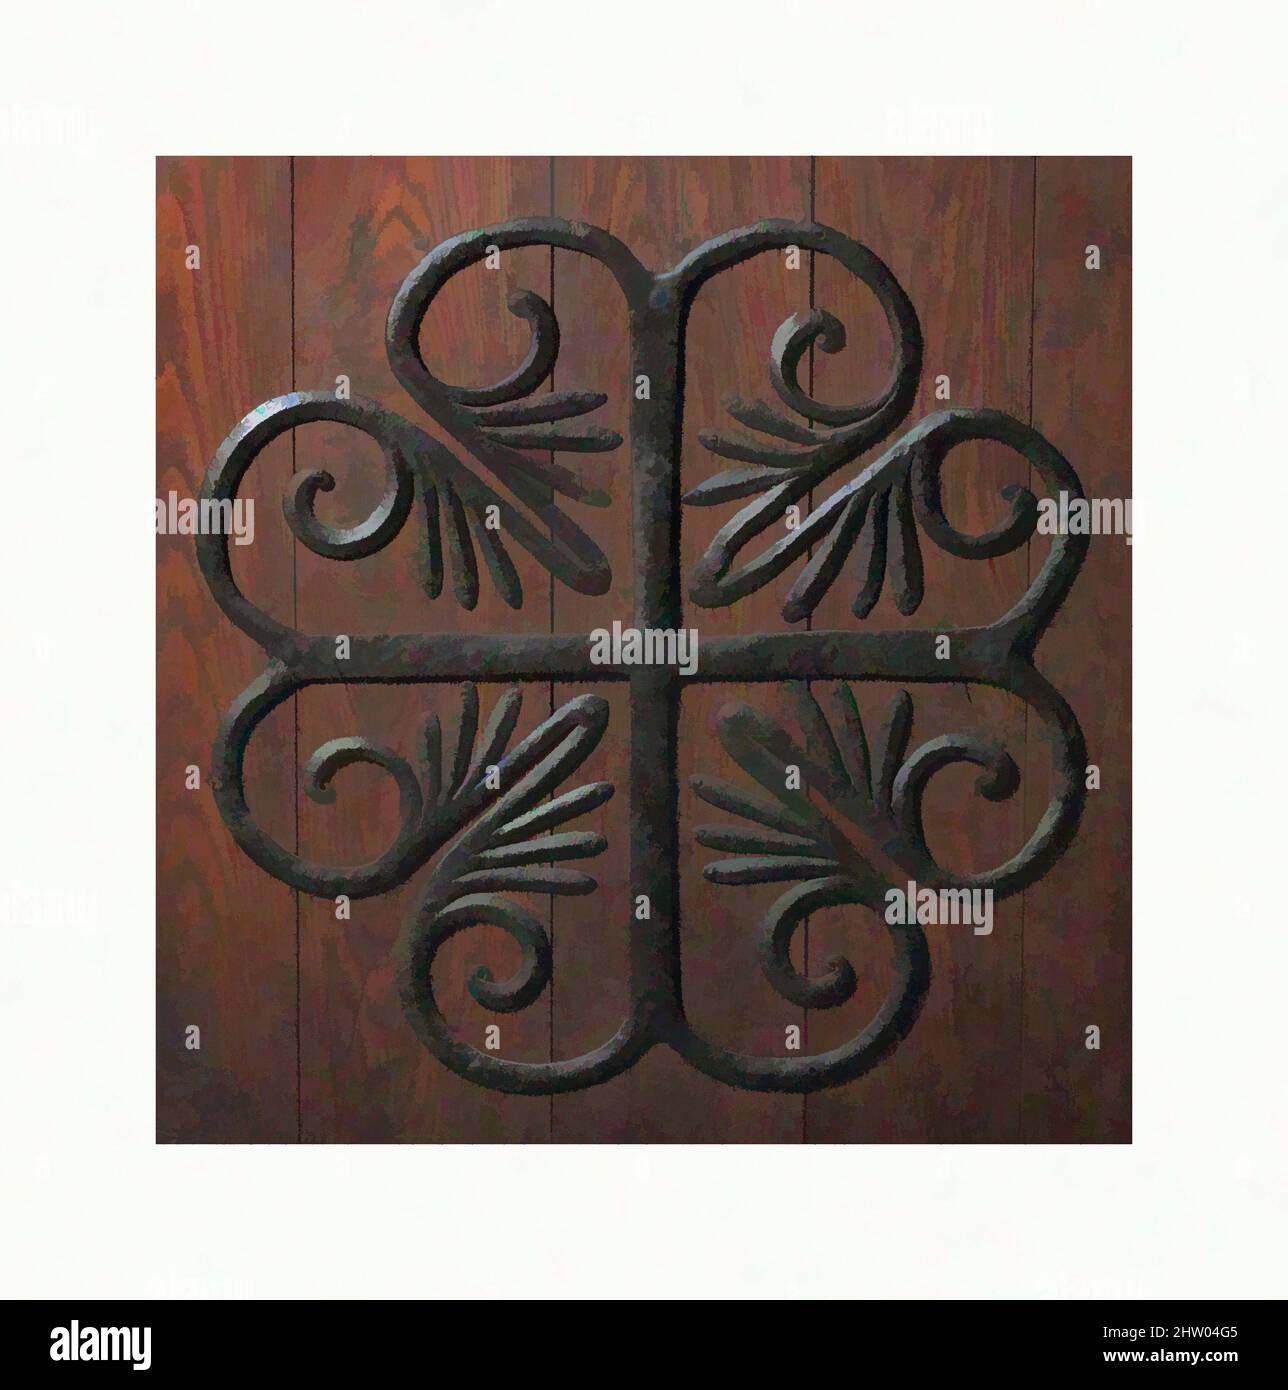 Art inspired by Door Mount, possibly 11th century, Made in Limousin, France, French, Iron, Overall: 28 3/8 x 28 3/8 in. (72.1 x 72.1 cm), Metalwork-Iron, Their utilitarian function notwithstanding, medieval door mounts are often ornately designed, with geometric and fanciful motifs, Classic works modernized by Artotop with a splash of modernity. Shapes, color and value, eye-catching visual impact on art. Emotions through freedom of artworks in a contemporary way. A timeless message pursuing a wildly creative new direction. Artists turning to the digital medium and creating the Artotop NFT Stock Photo